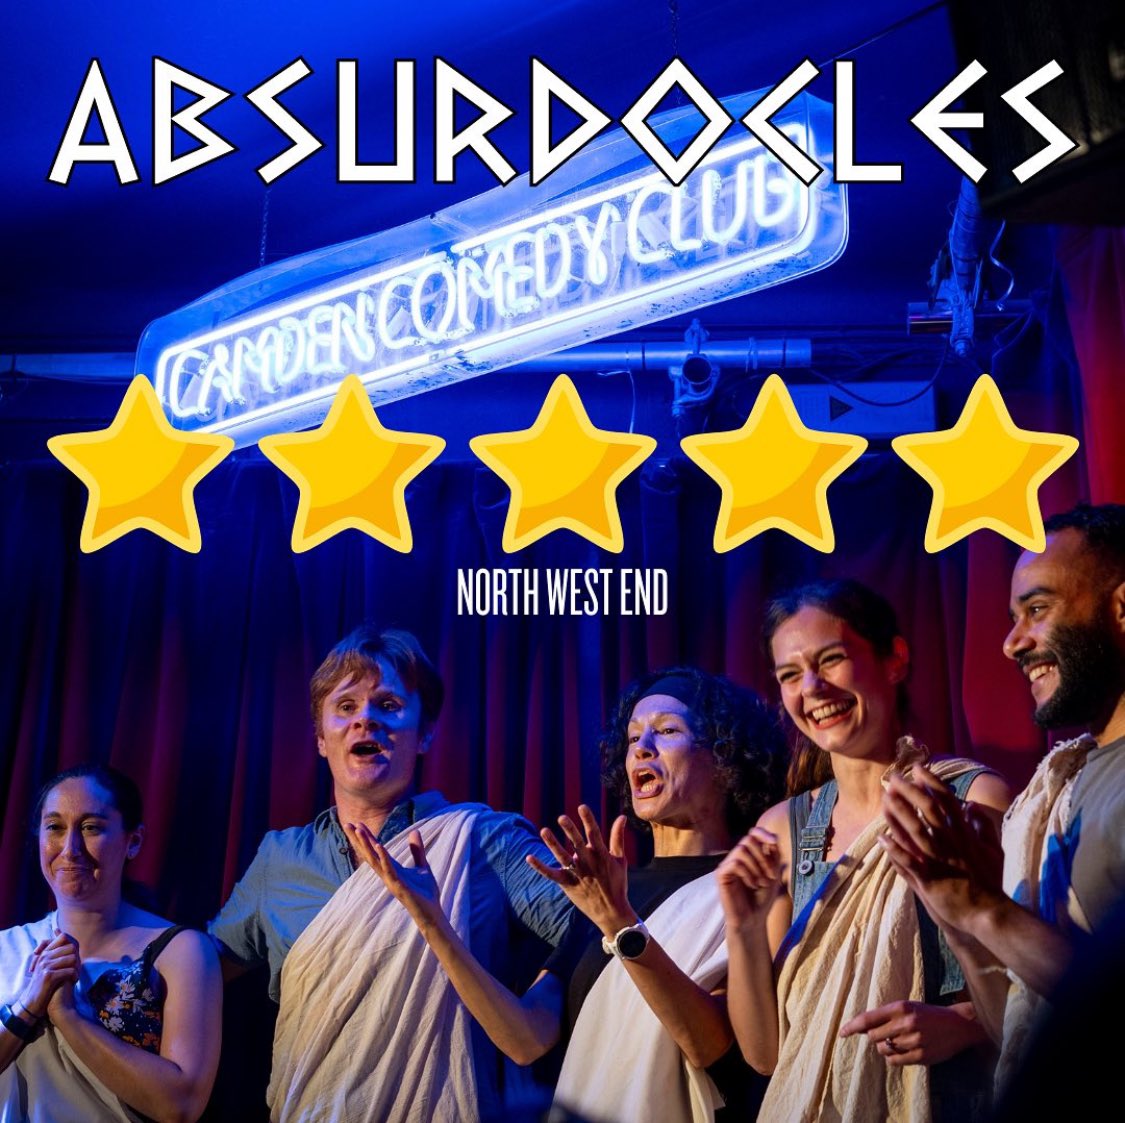 The last show covered topics of war, chiropractic medicine and fingering. Come watch @absurdocles the greatest Greek Tragedy never told. Sun 3 March 7pm @CamdenComedy absurdocles.com #improvcomedy #londoncomedy